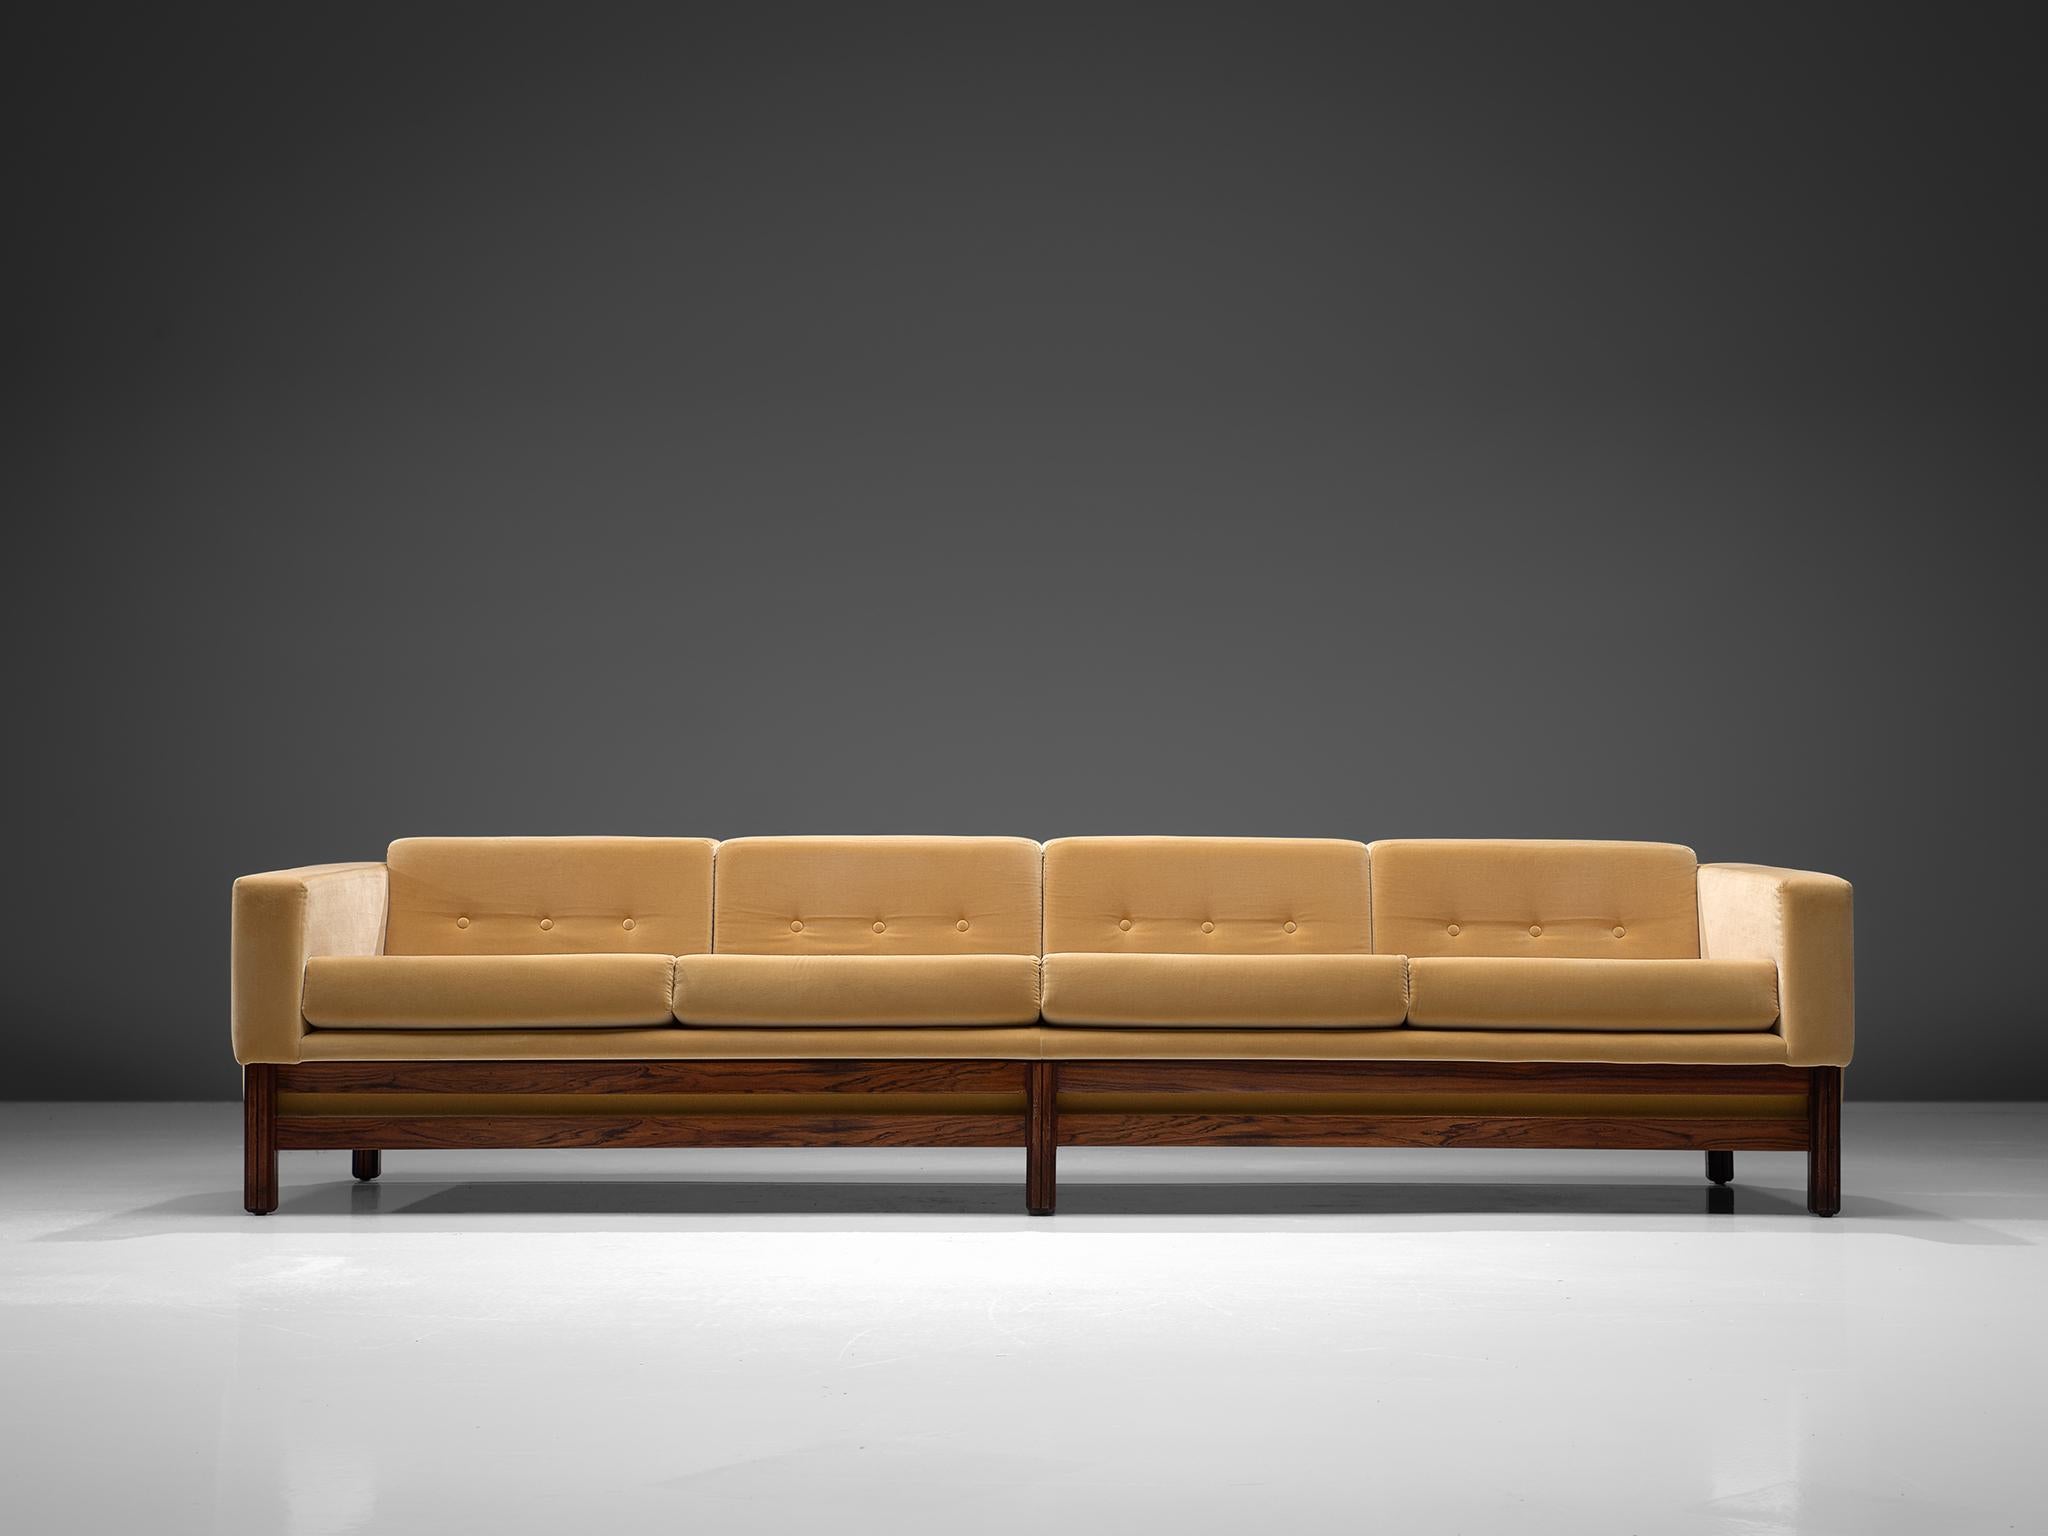 Sofa, in rosewood and fabric by Saporiti, Italy, 1960s.

This sofa, equipped with a solid rosewood frame is reupholstered in high quality yellow velours like fabric. Done by our own team of specialists of the in-house atelier. The sofa is designed